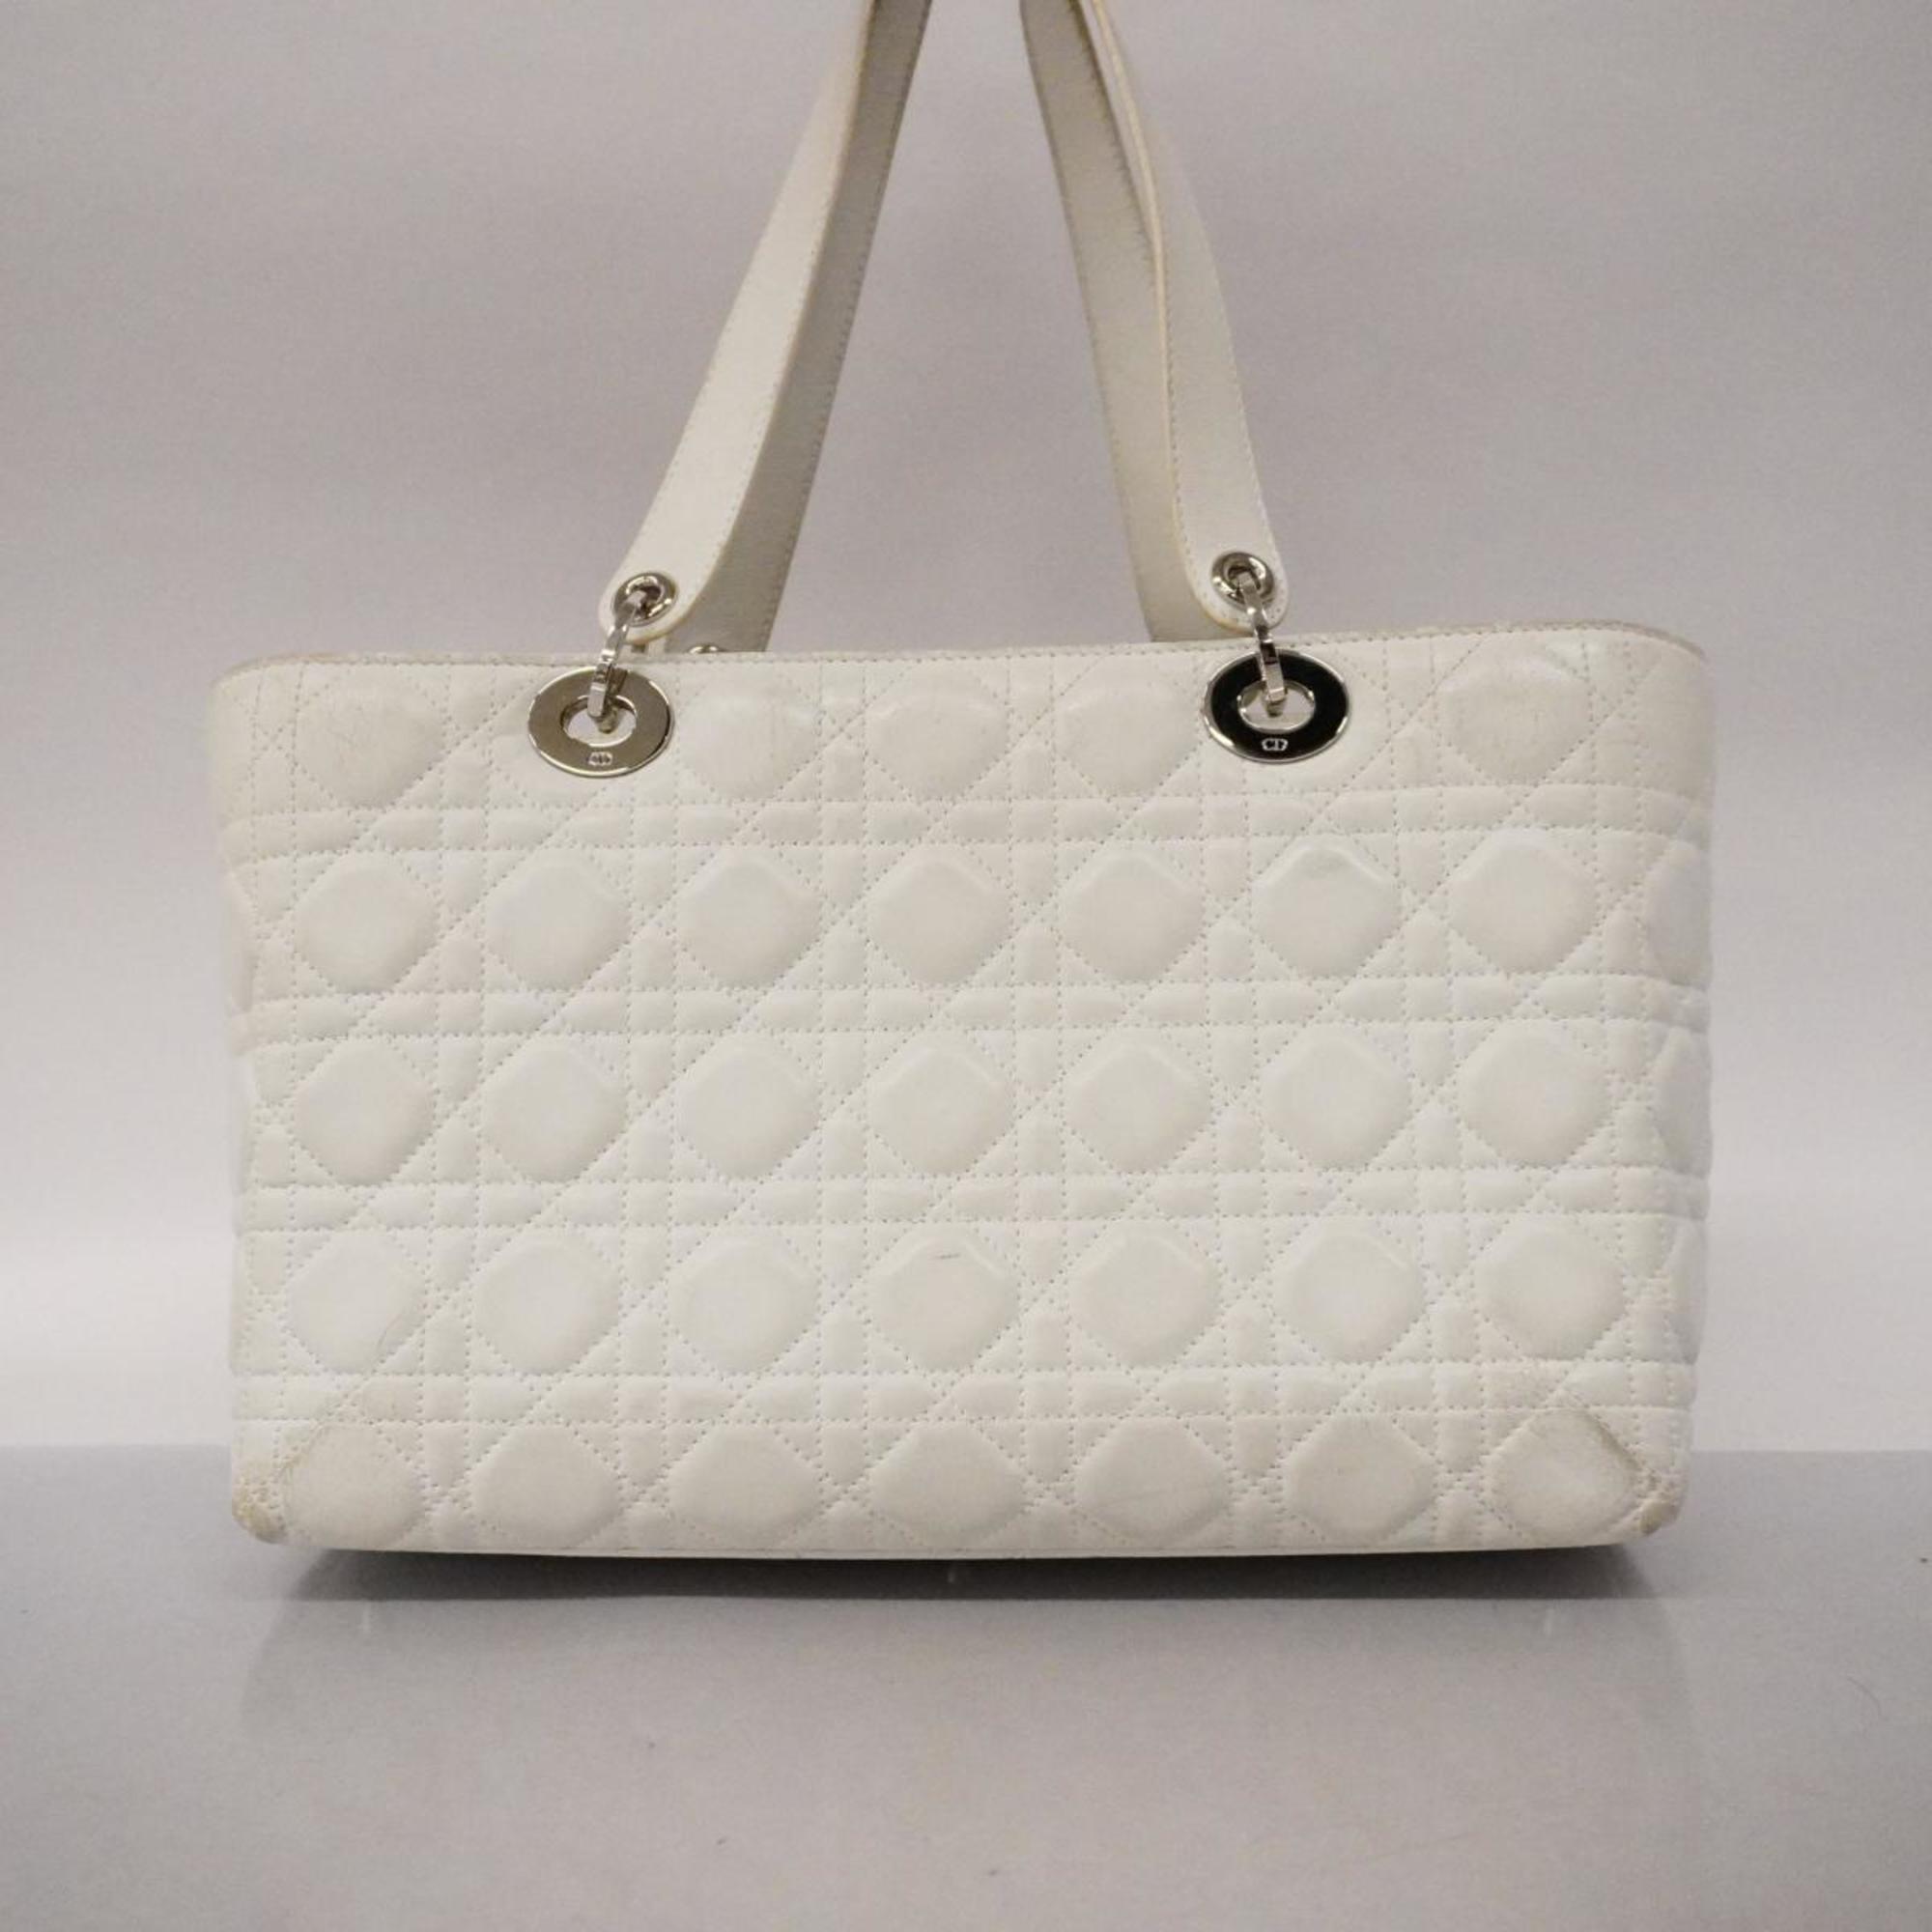 Christian Dior Tote Bag Cannage Lady Leather White Women's